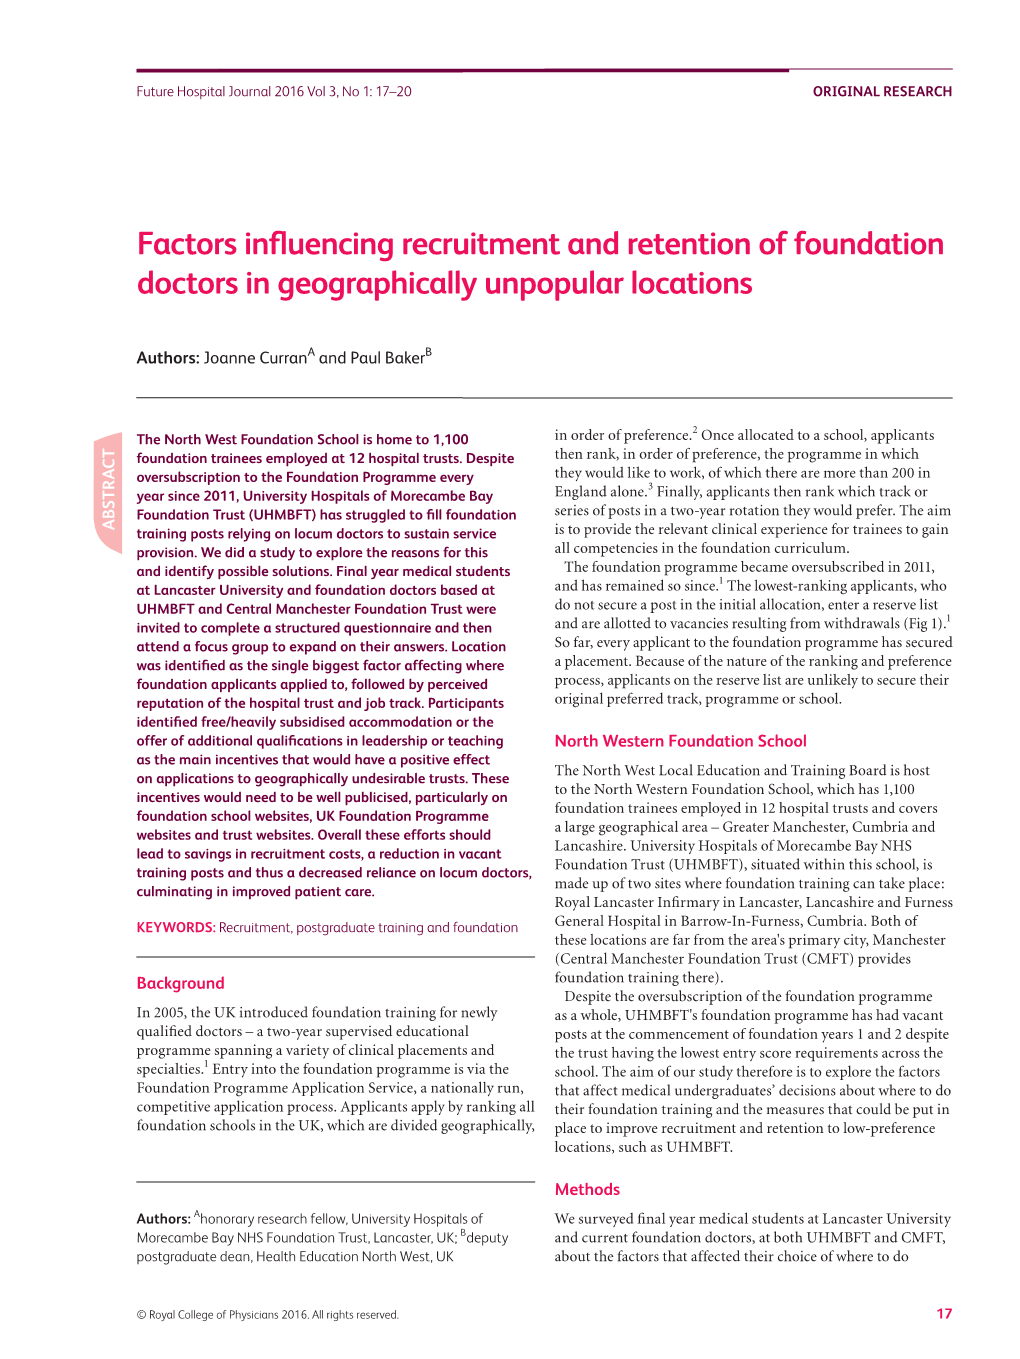 Factors Influencing Recruitment and Retention of Foundation Doctors In